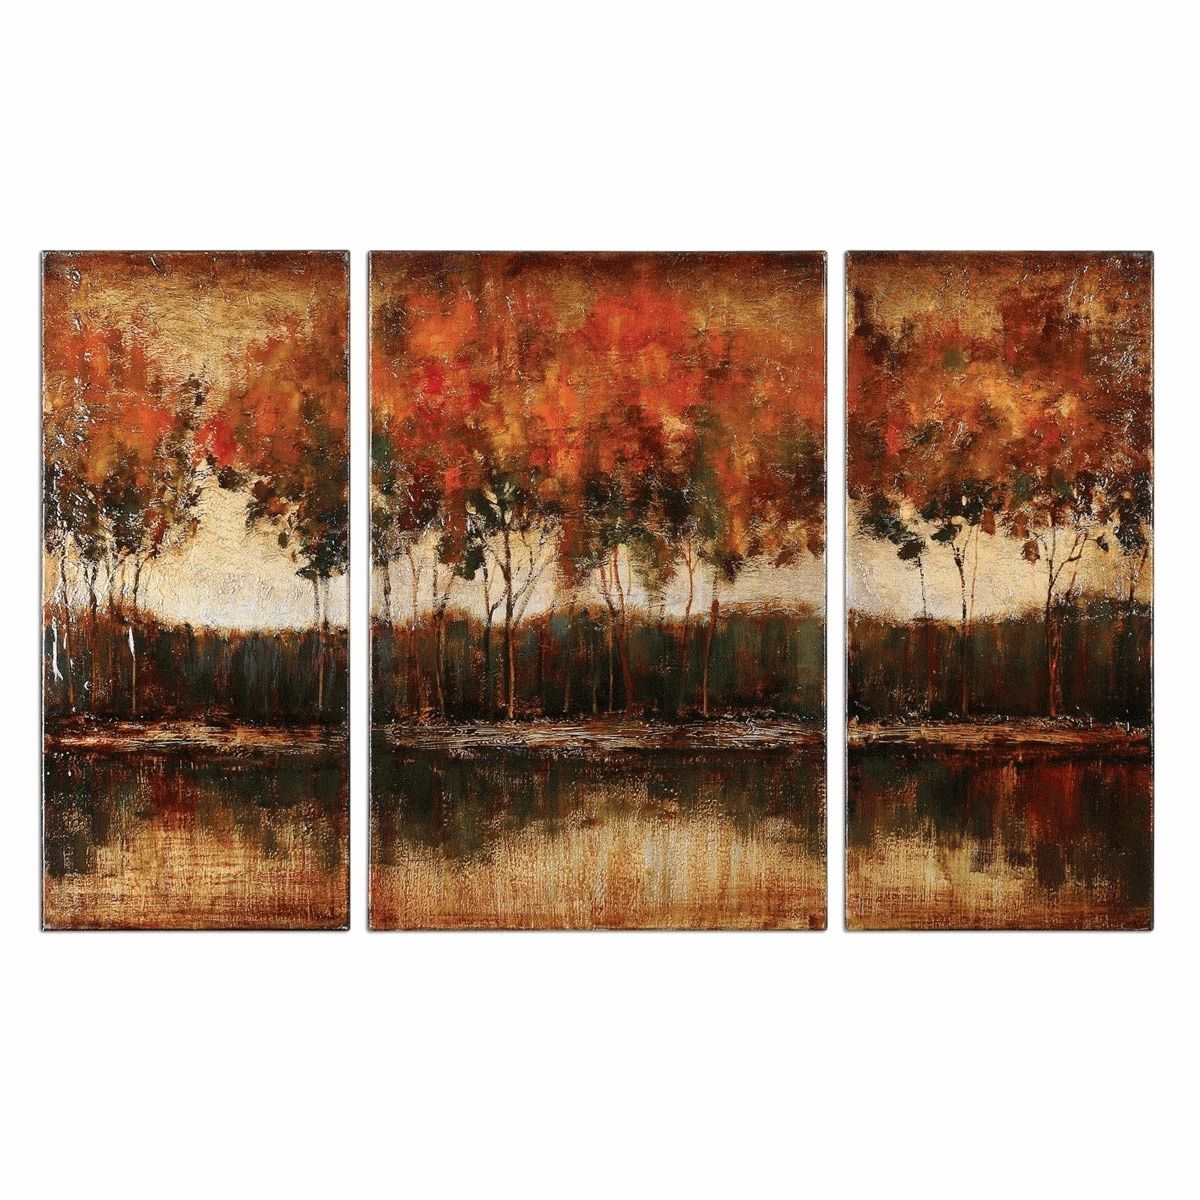 Trilakes Canvas Wall Art – Set Of 3 With Most Up To Date Cheap Wall Art Canvas Sets (View 8 of 15)